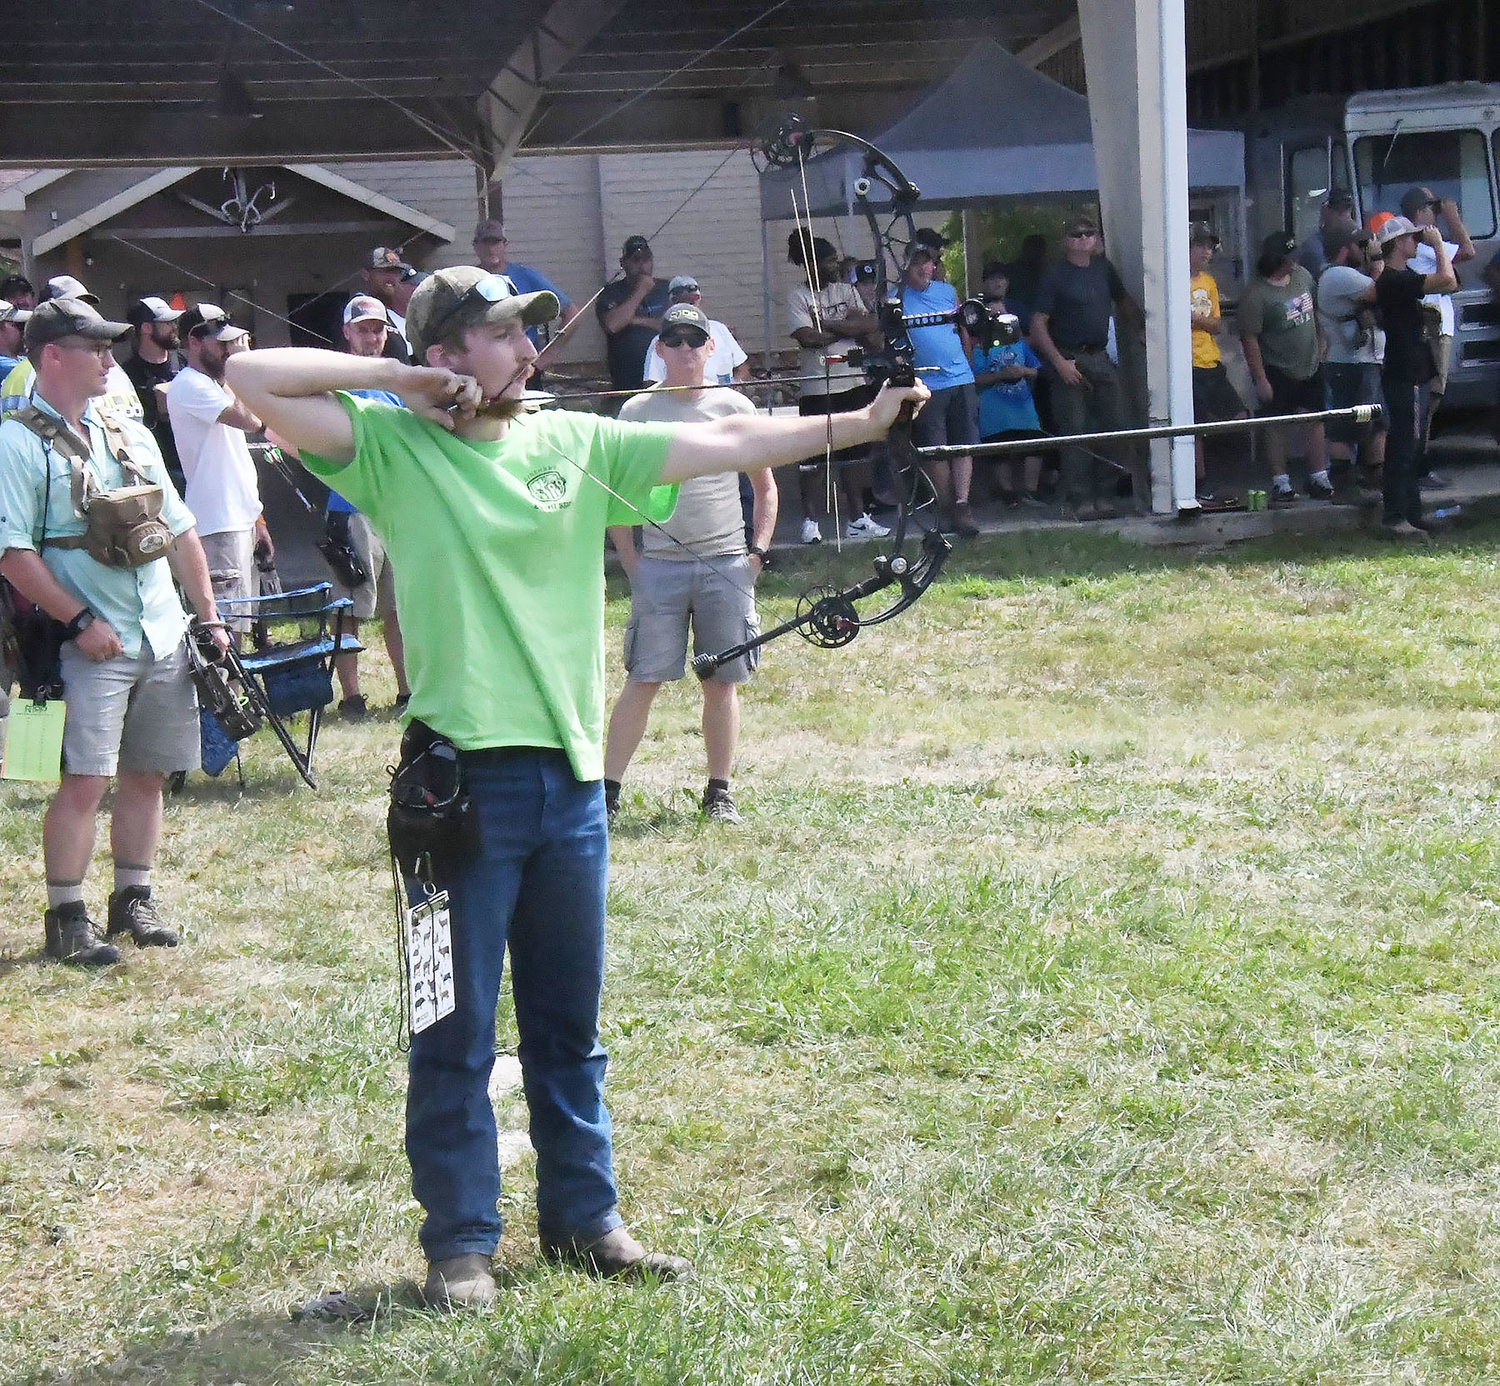 Hunter Stephens of Clark prepares to shoot during the Badlands Iron Buck event. Stephens had a successful weekend of shooting, and was one of the final four contestants left in this event.